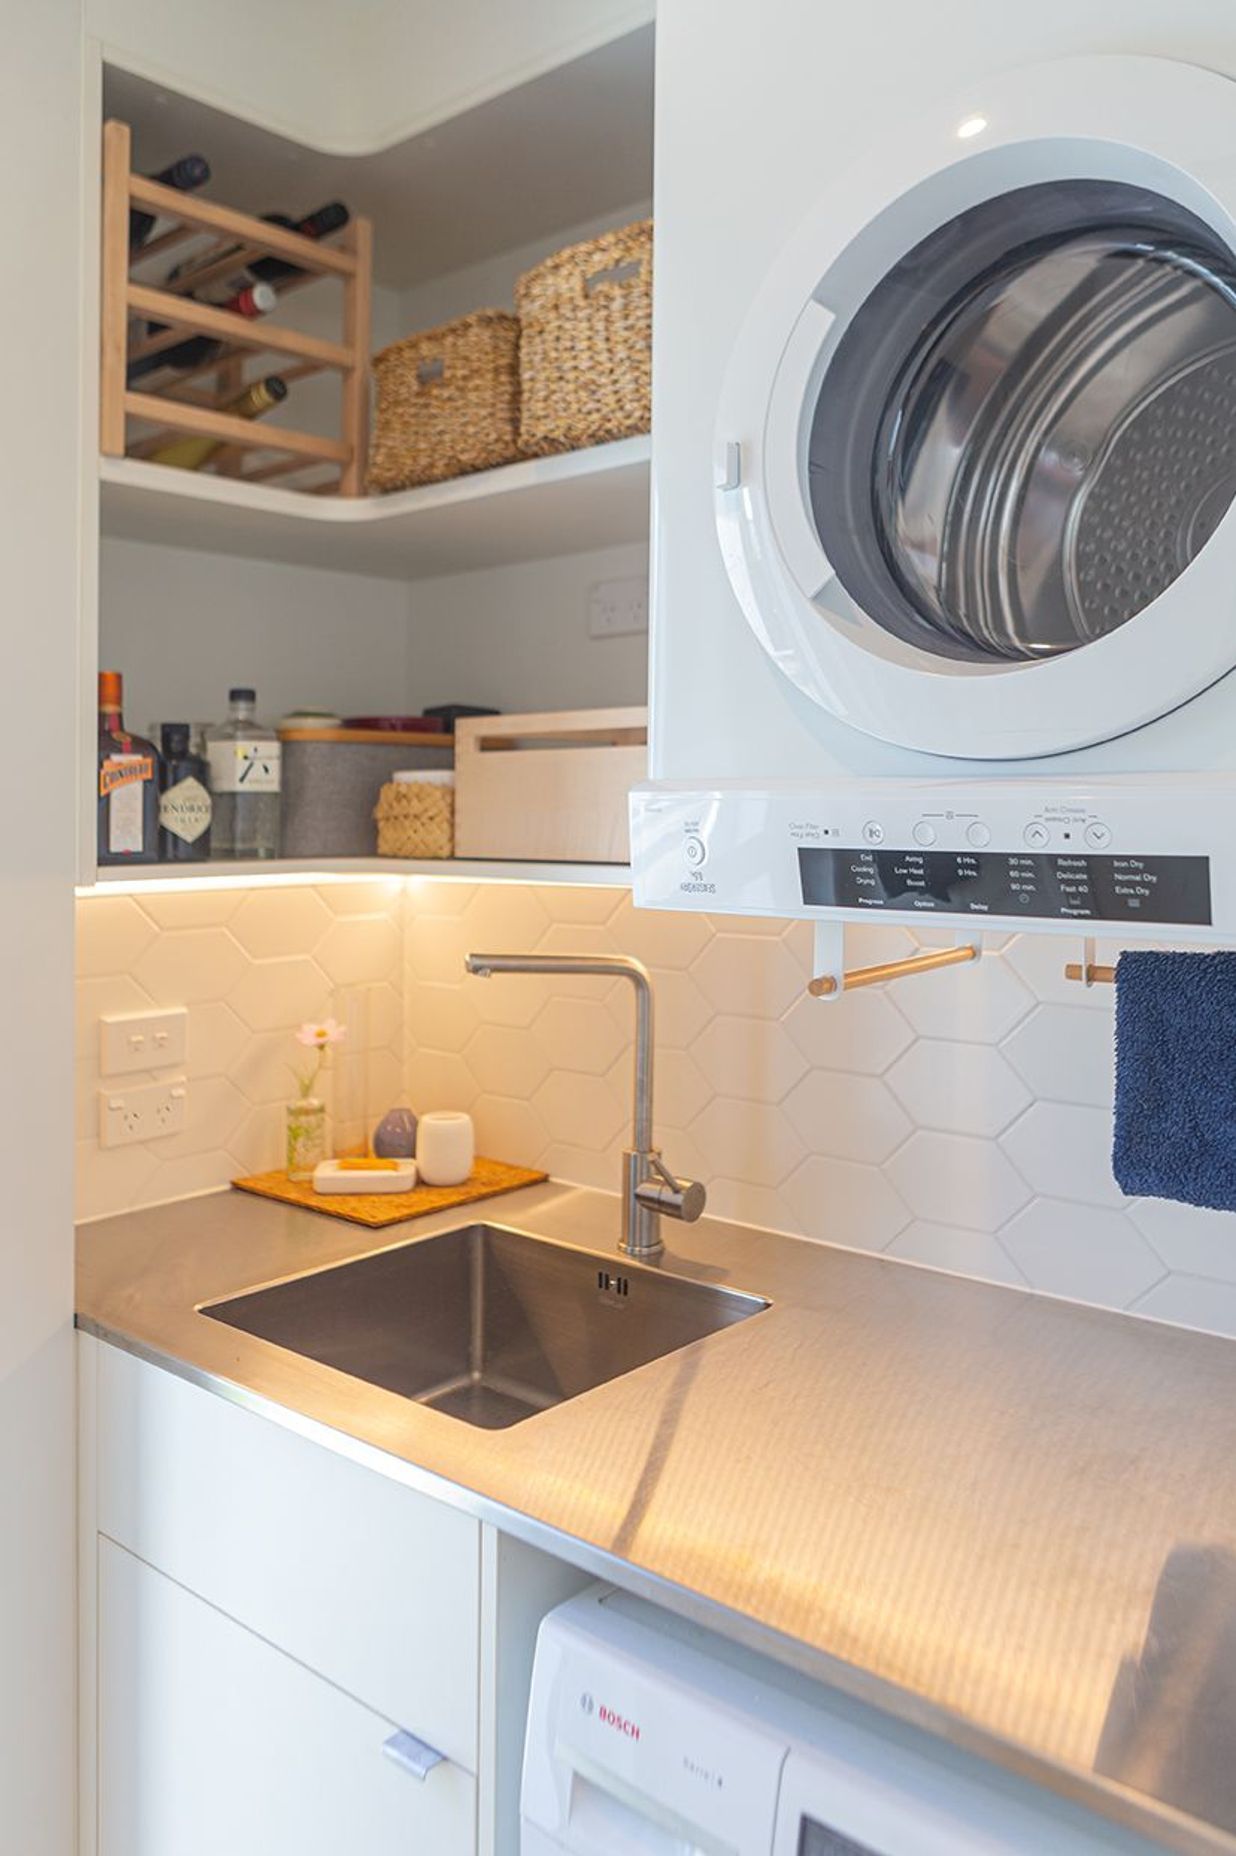 Stainless steel bench and inset sink are clean practical solutions in a laundry or scullery.